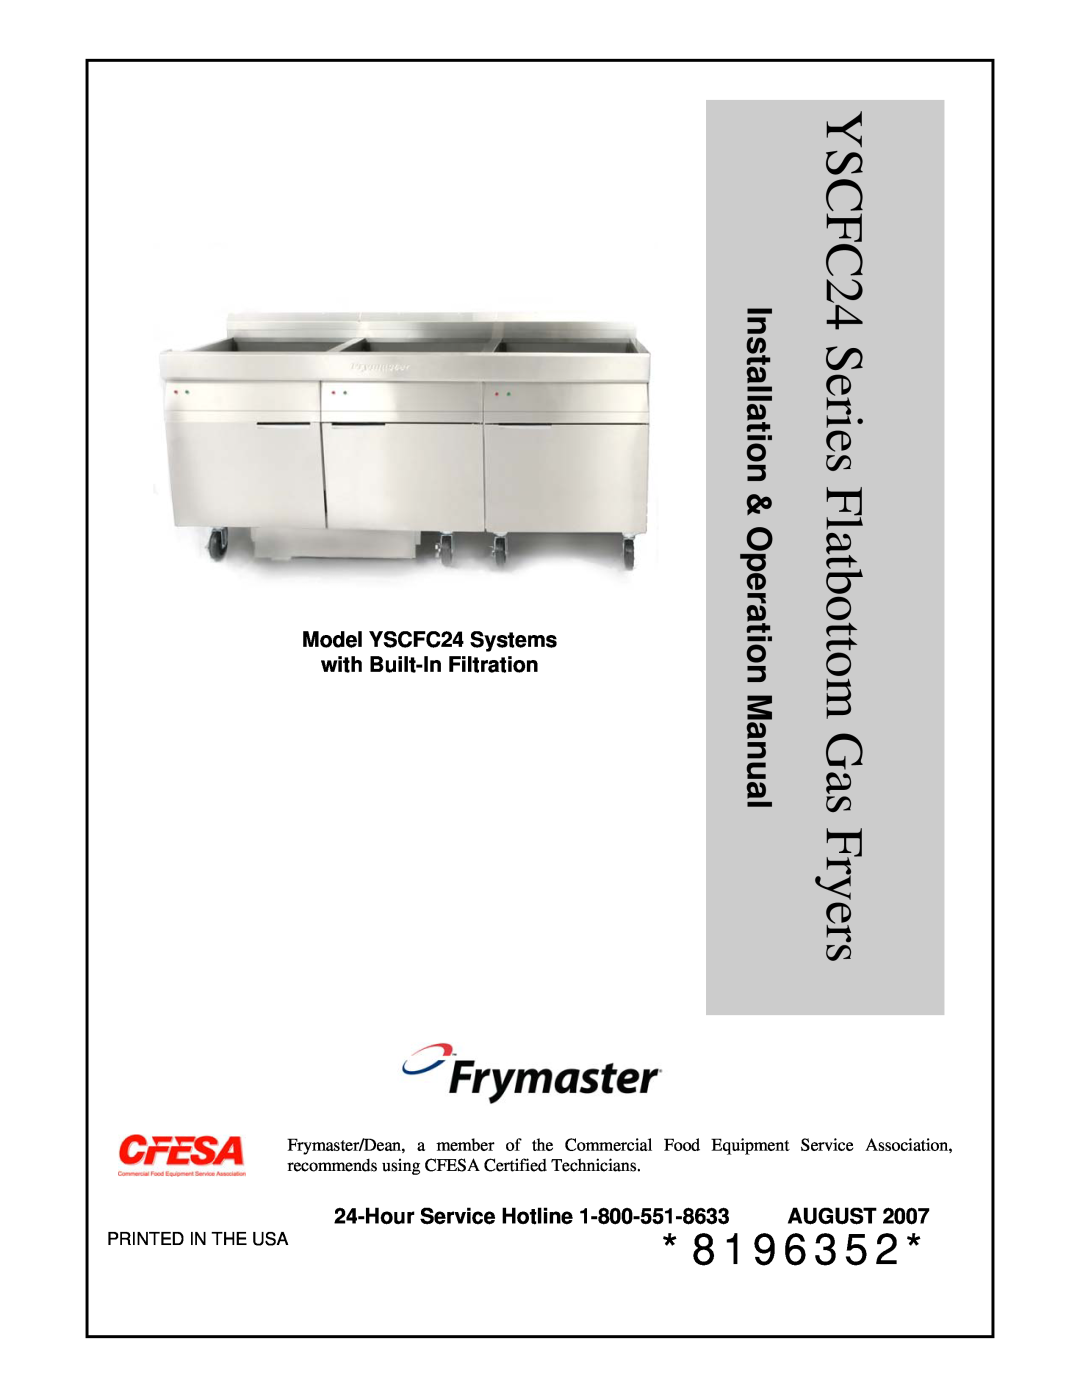 Frymaster operation manual Model YSCFC24 Systems with Built-InFiltration, HourService Hotline, YSCFC24 Series, Fryers 